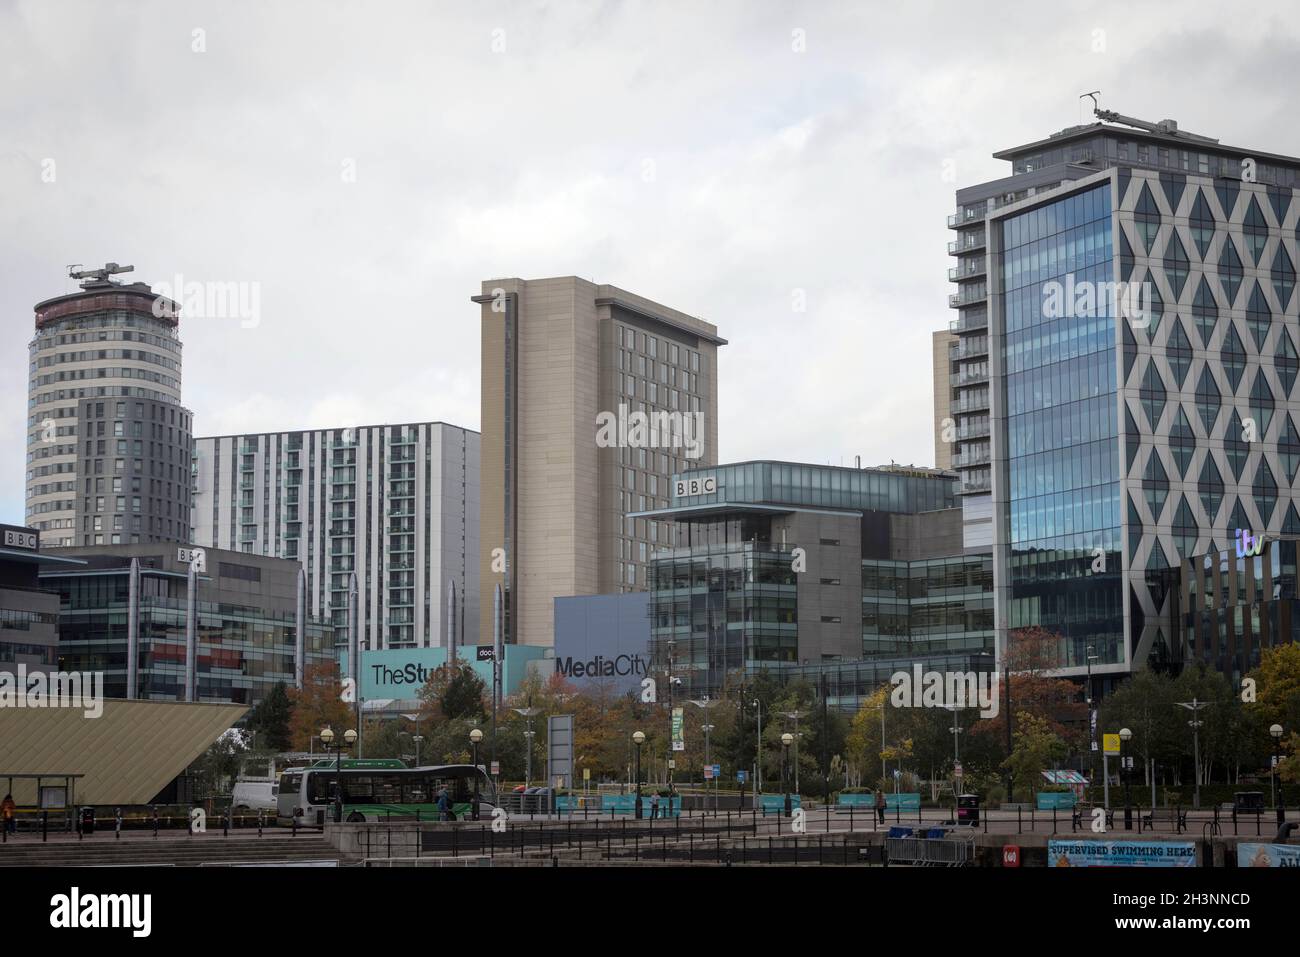 Media City, Salford Quays, Greater Manchester Stock Photo